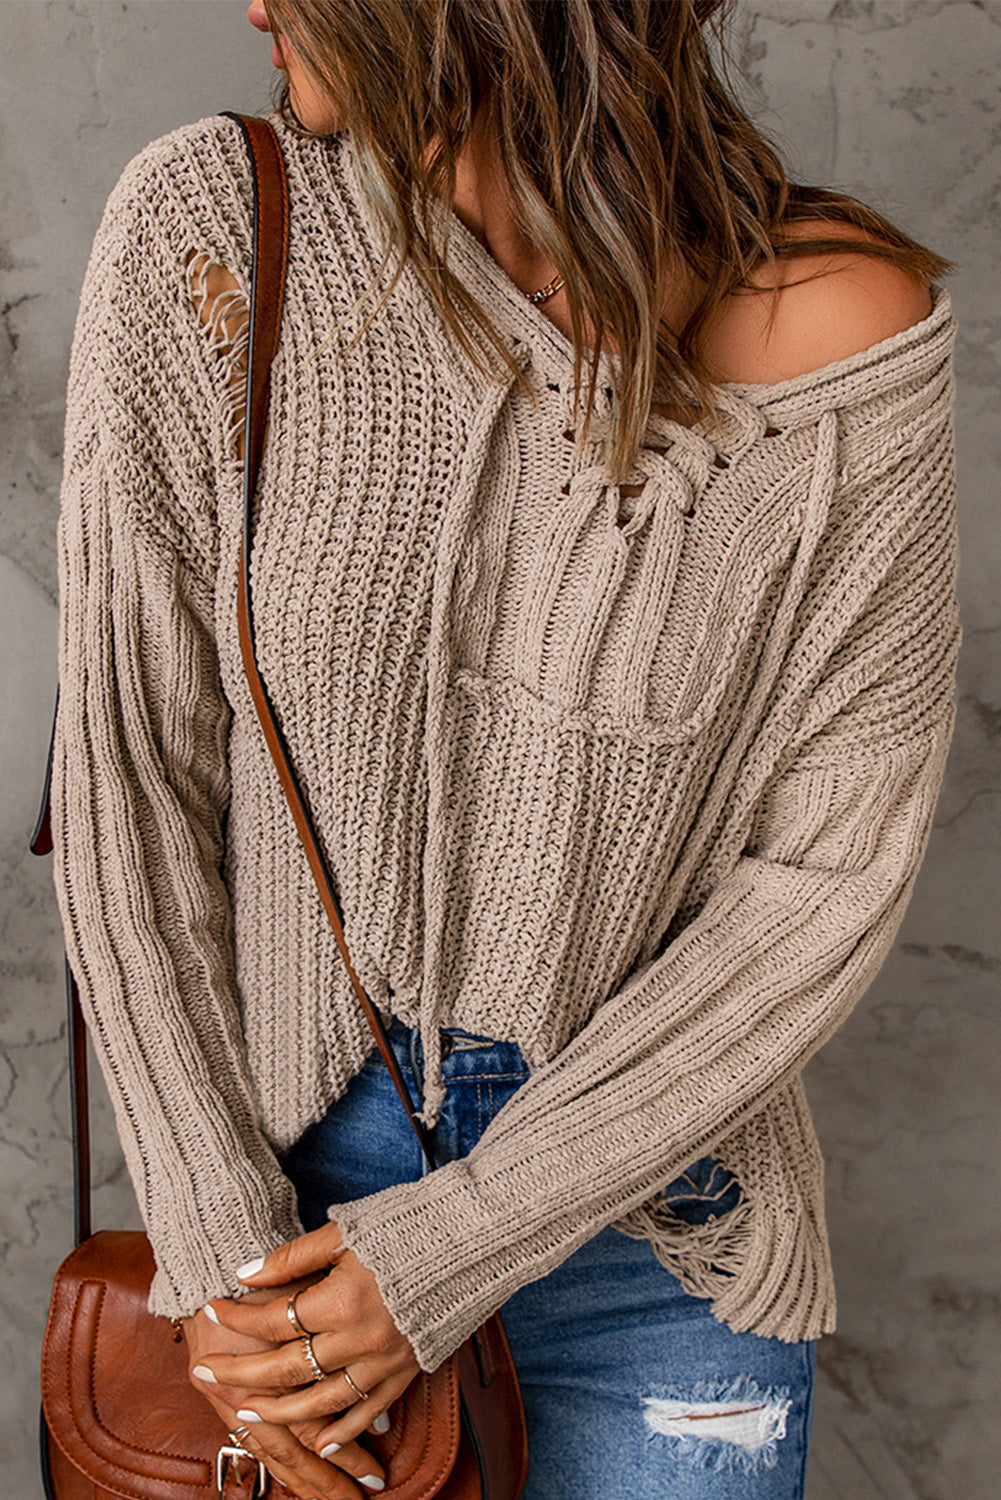 Lace Up V Neck Ripped Slouchy Hooded Sweater